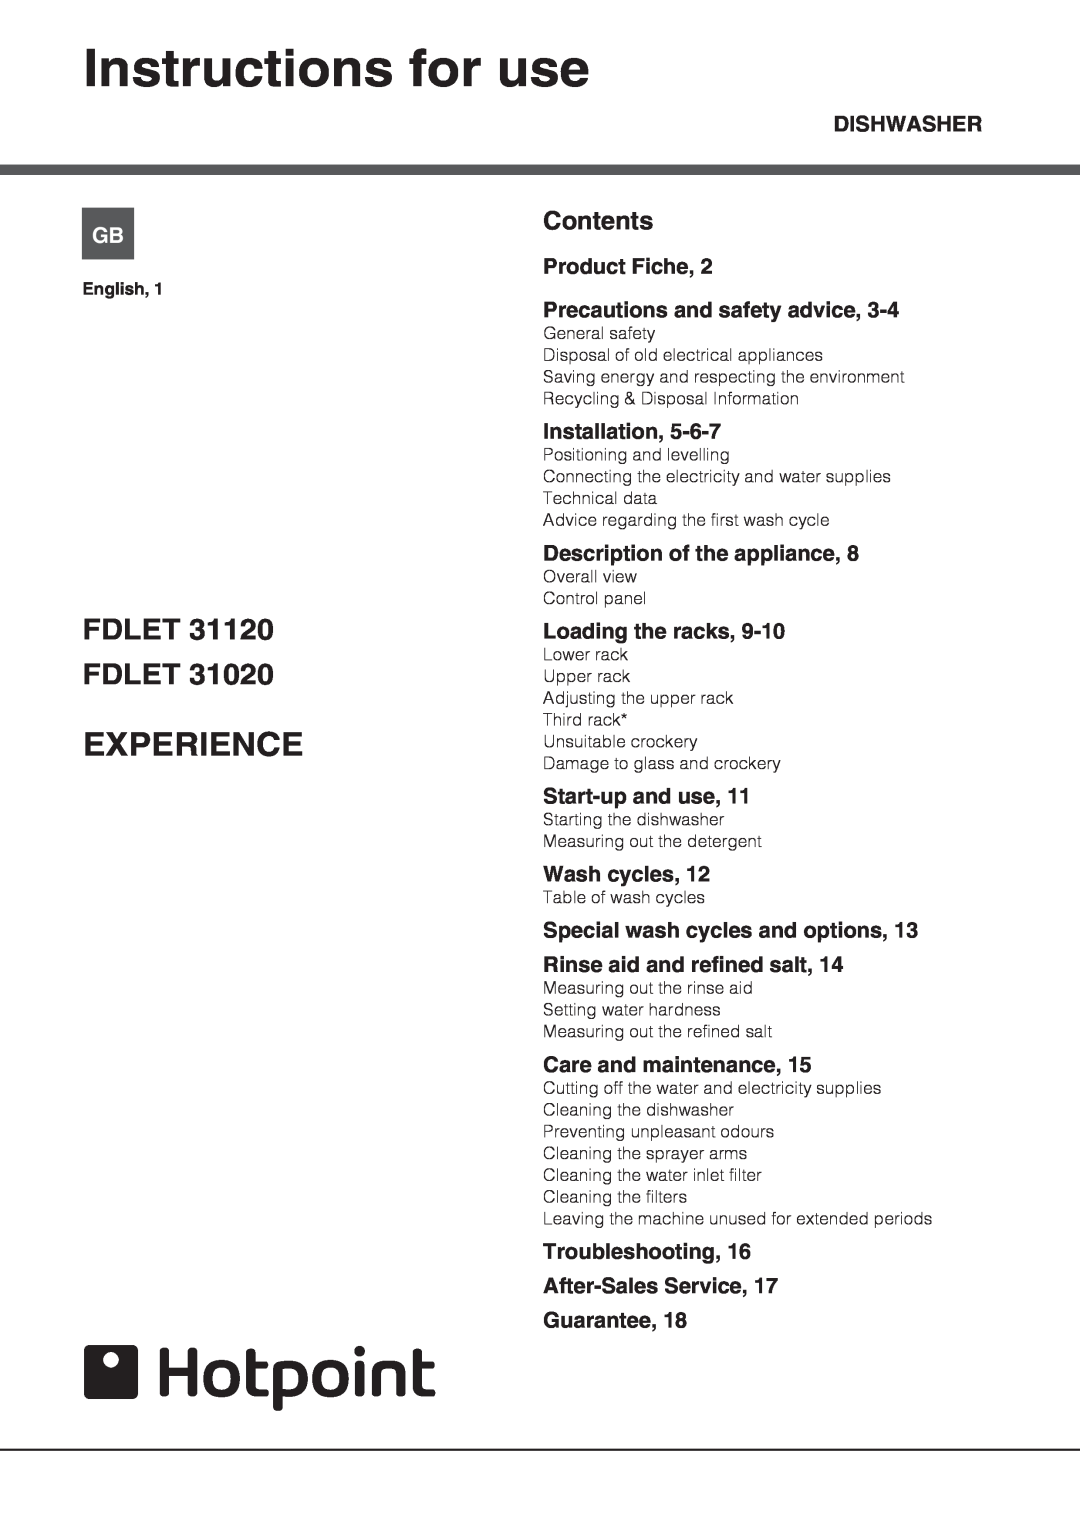 Hotpoint FDLET 31020 manual Instructions for use, Experience, FDLET 31120 FDLET, Contents 